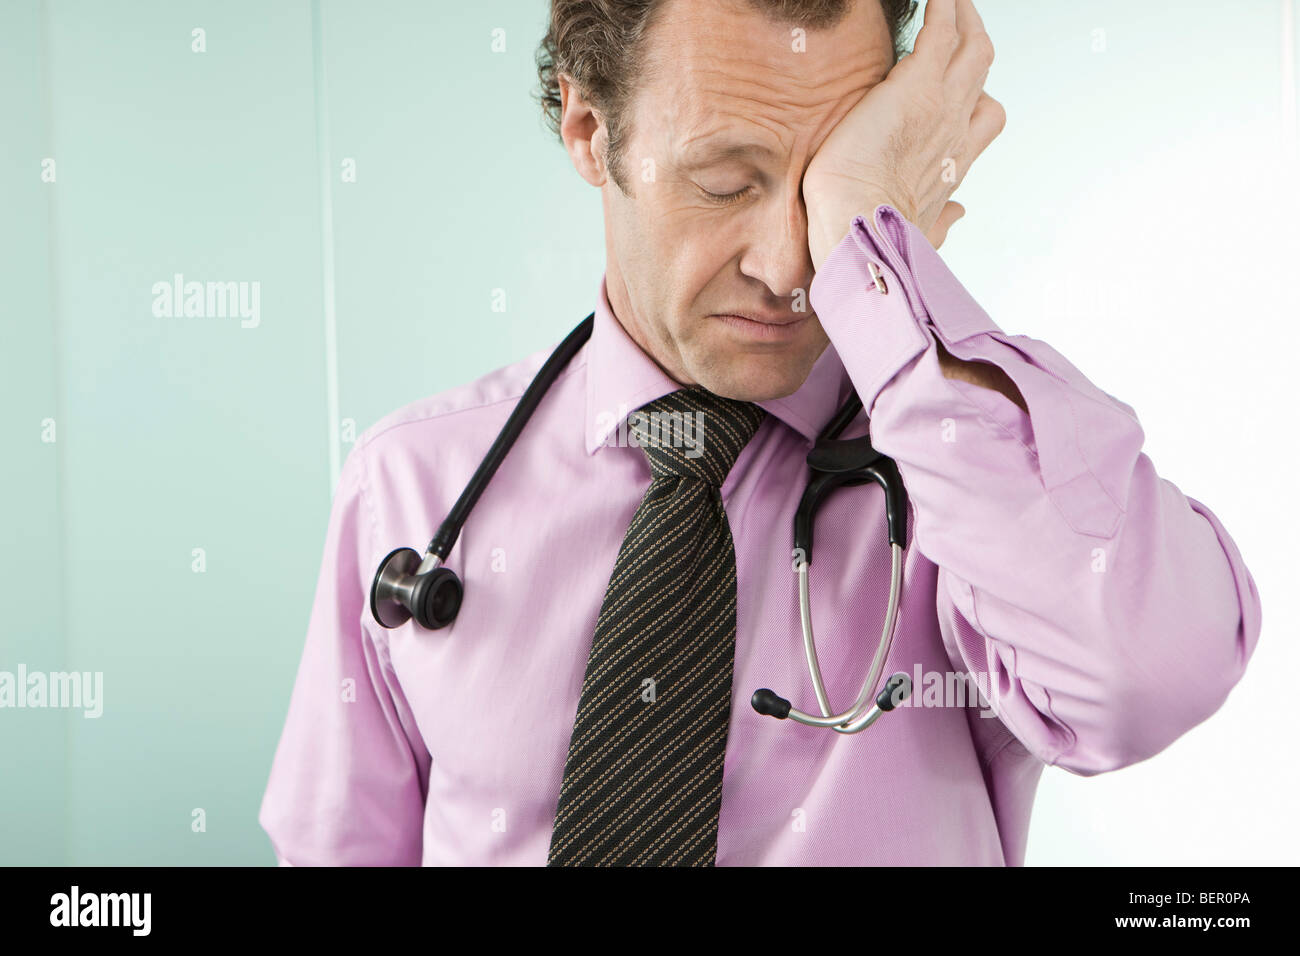 A tired doctor rubbing his eyes Stock Photo